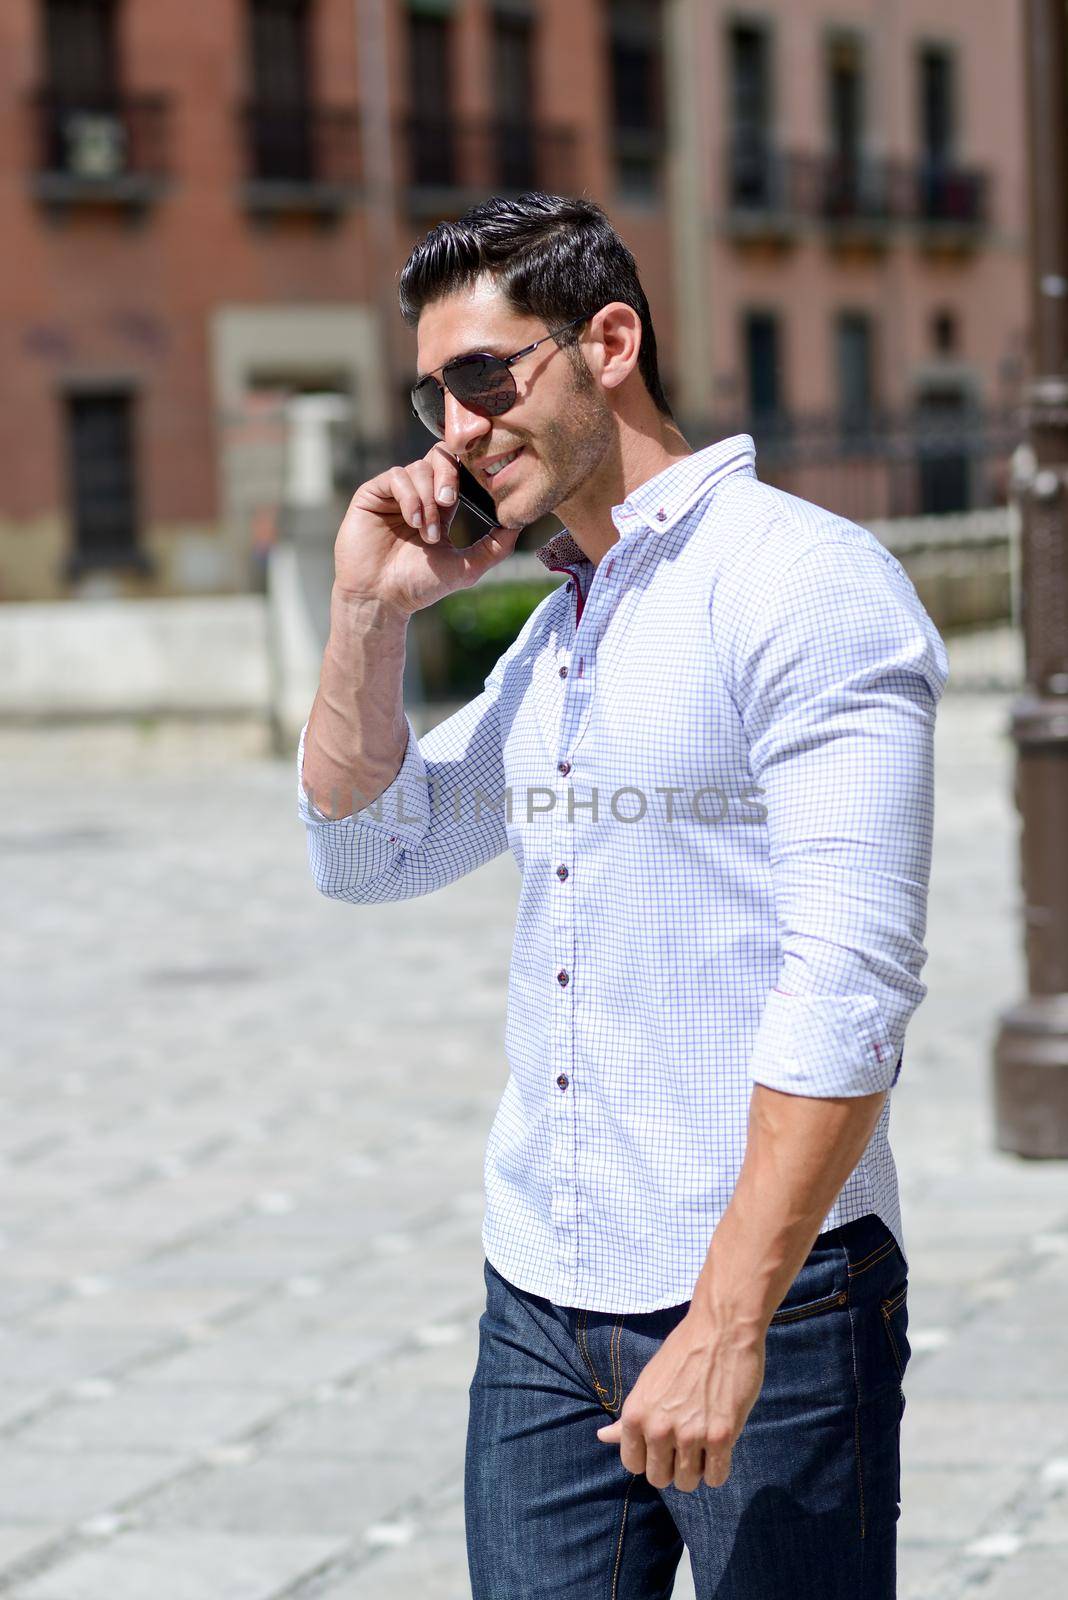 Handsome man in urban background talking on phone by javiindy